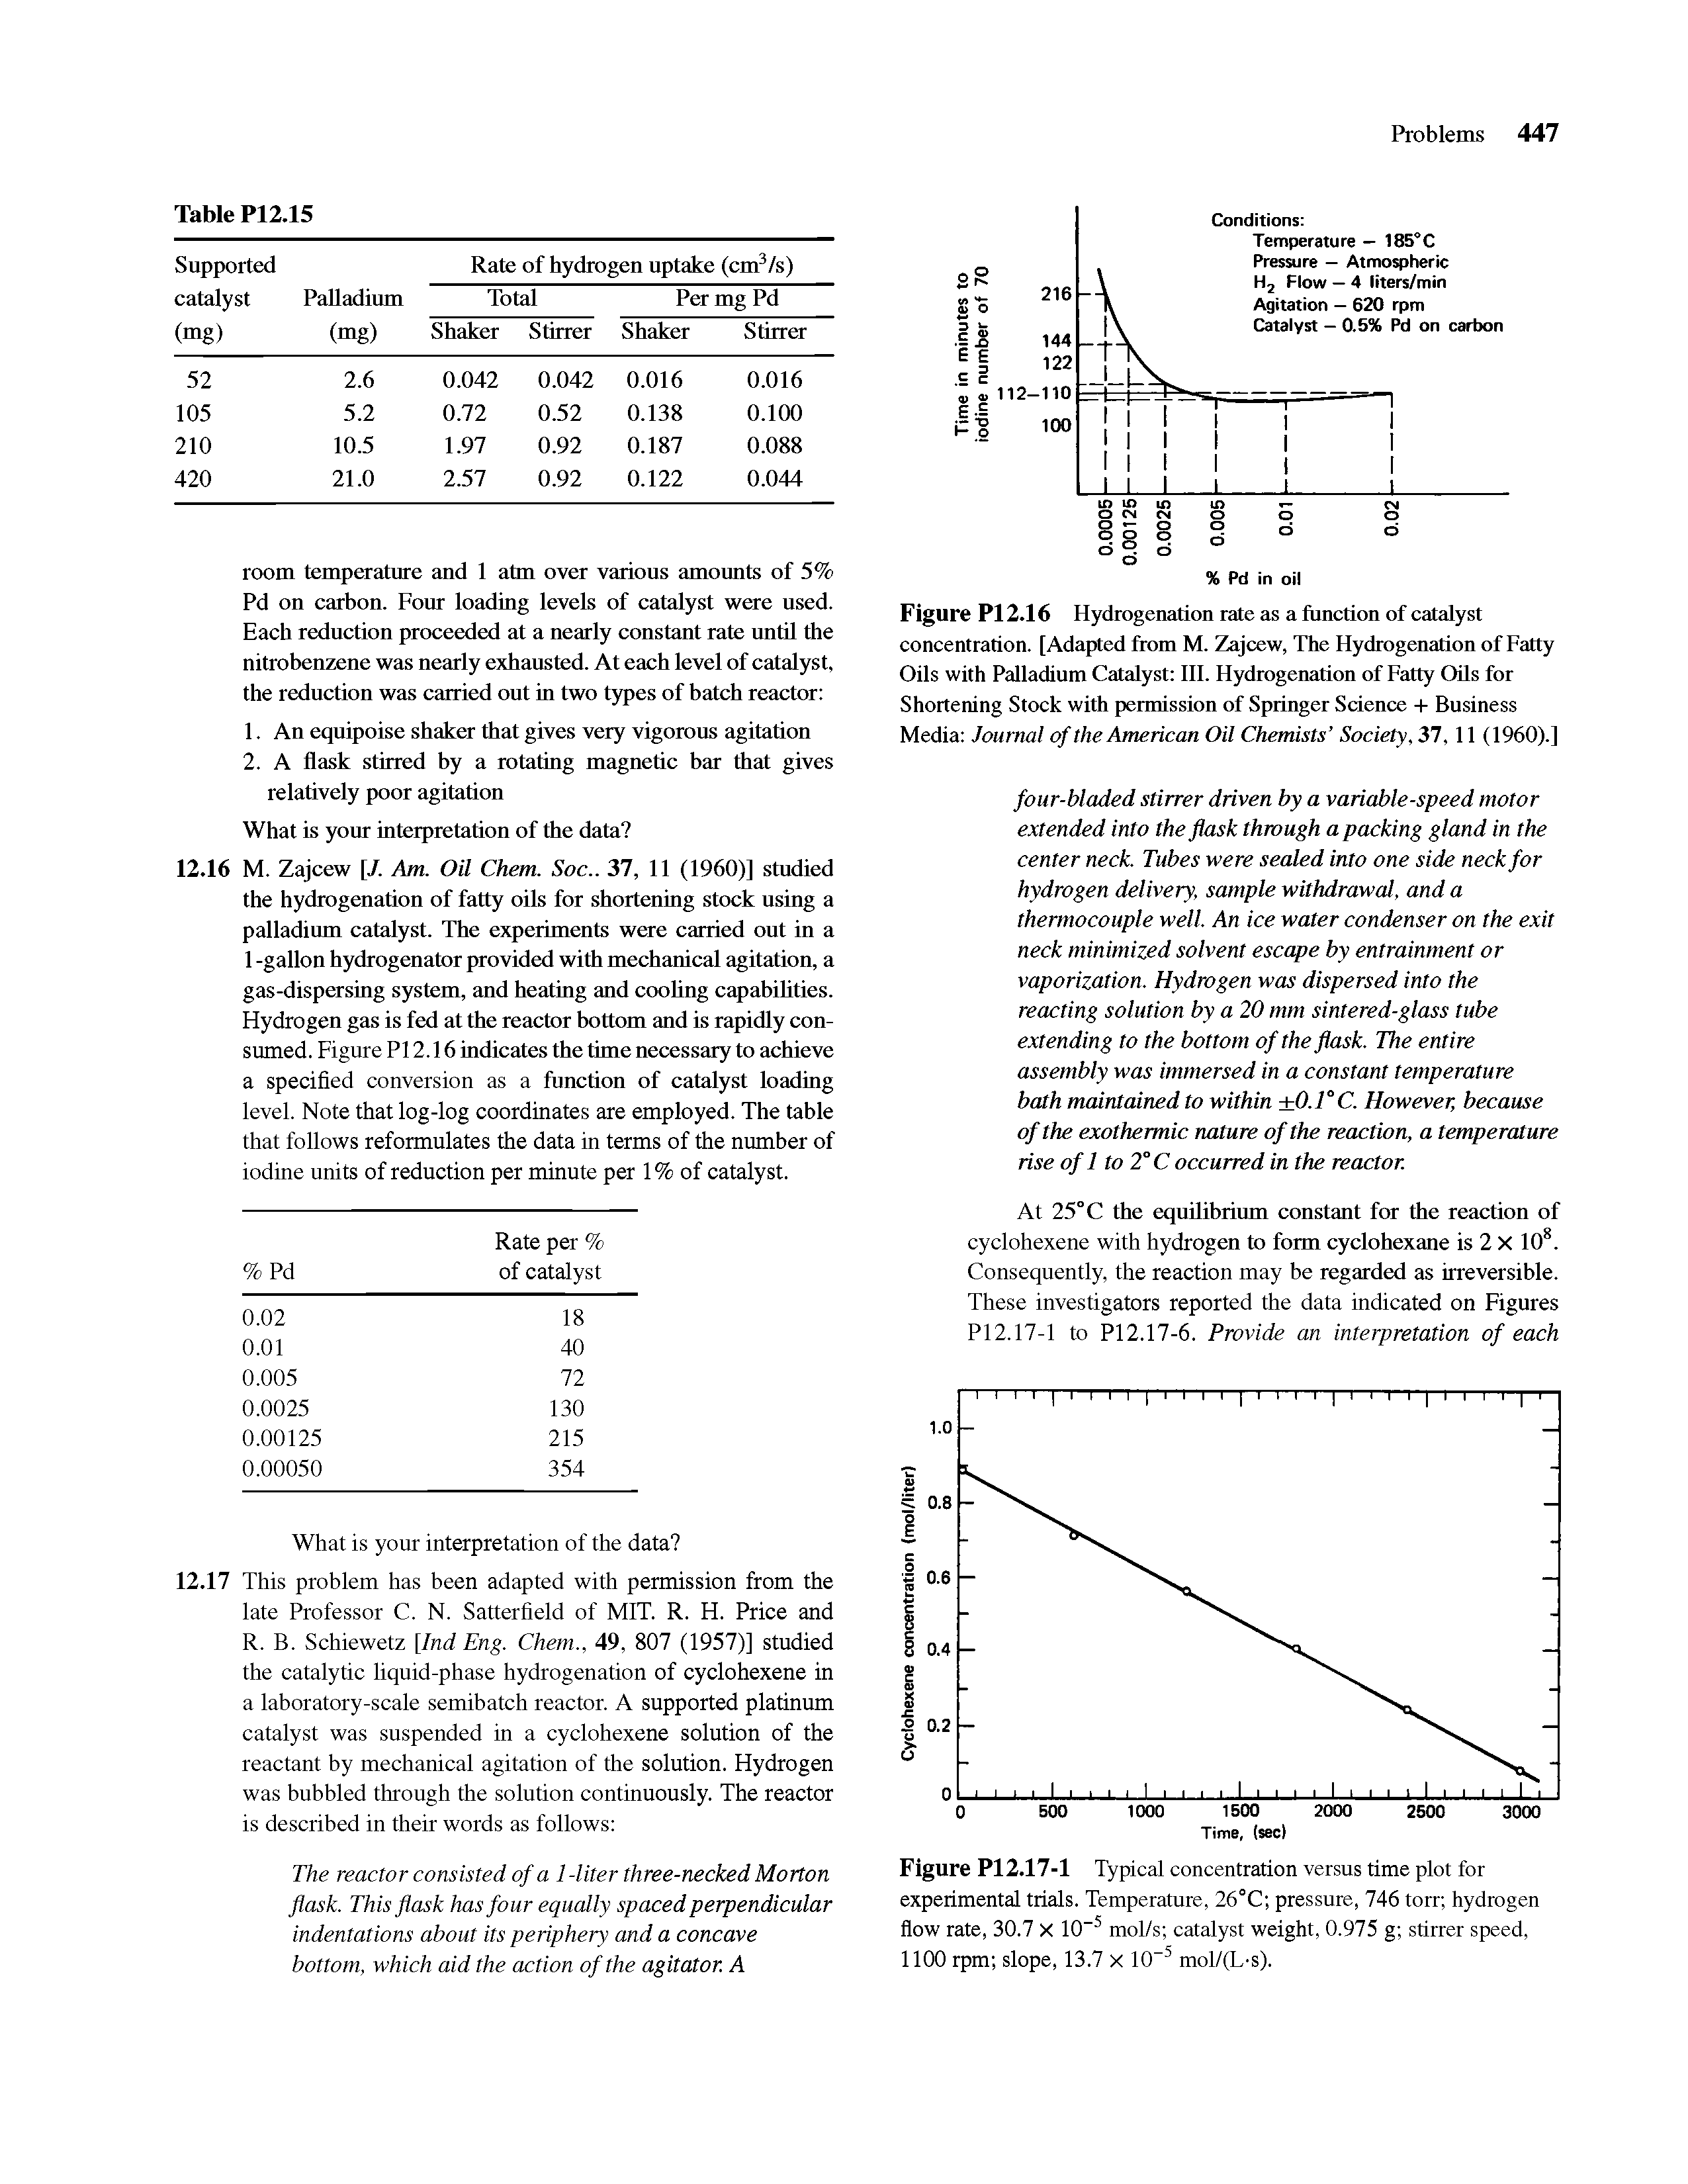 Figure P12.16 Hydrogenation rate as a function of catalyst concentration. [Adapted from M. Zajcew, The Hydrogenation of Fatty Oils with Palladium Catalyst III. Hydrogenation of Fatty QUs for Shortening Stock with permission of Springer Science -I- Business Media Journal of the American Oil Chemists Society, 37,11 (1%0).]...